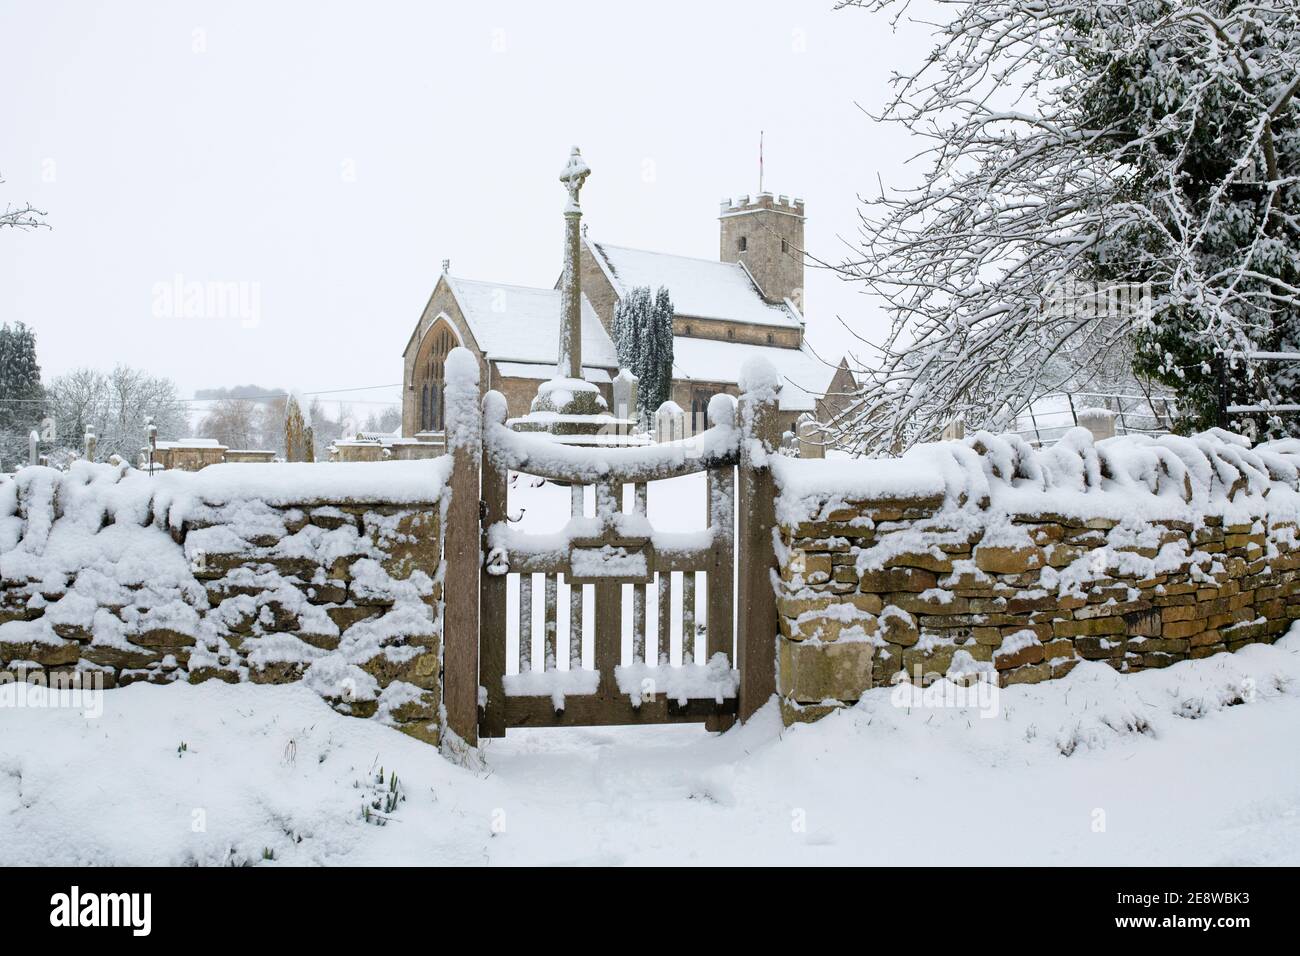 St Marys church and gate in the snow. Swinbrook, Cotswolds, Oxfordshire, England Stock Photo